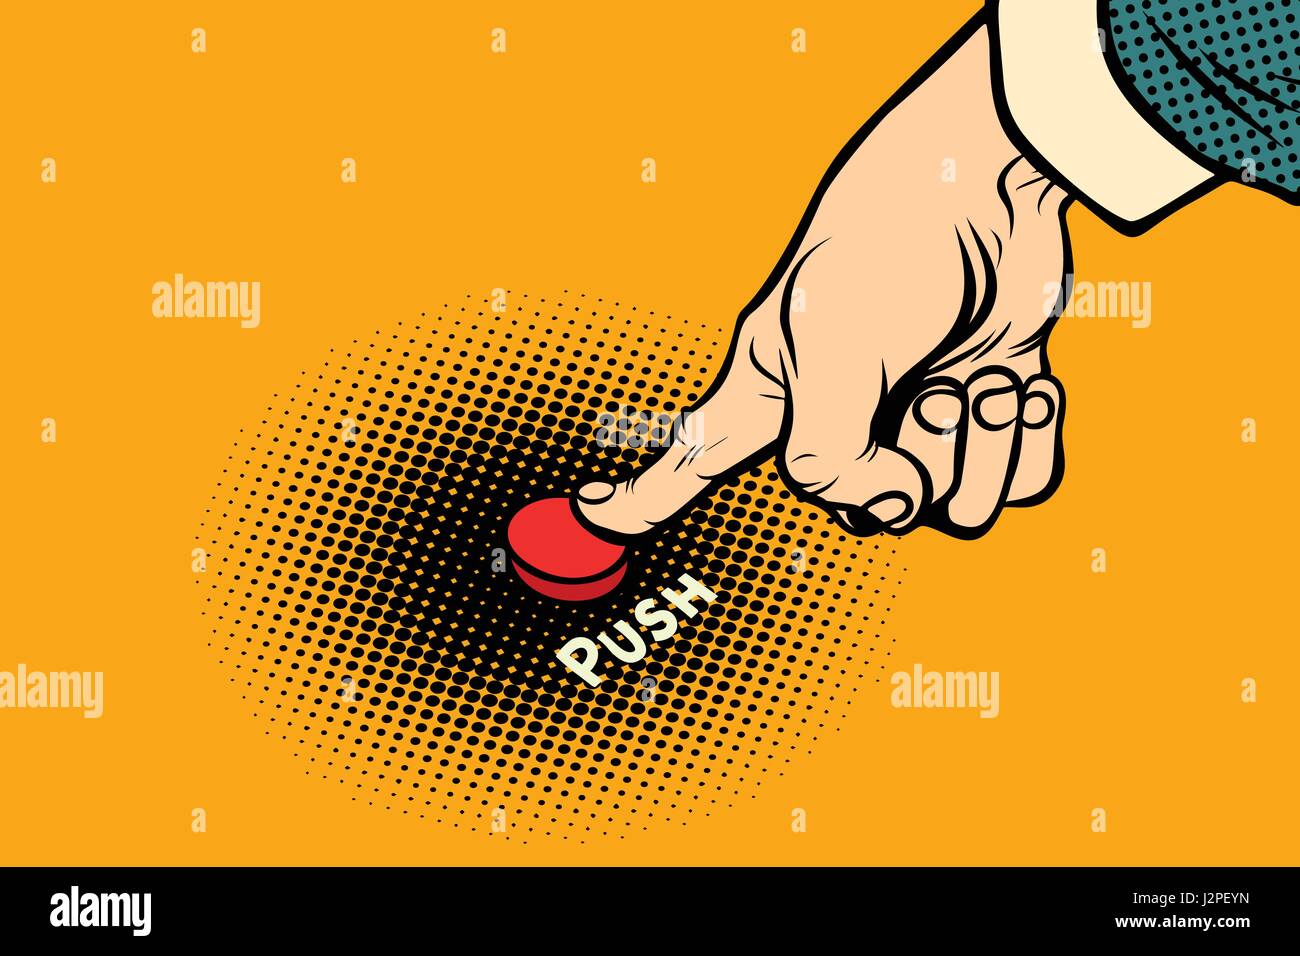 the hand presses red button Stock Vector